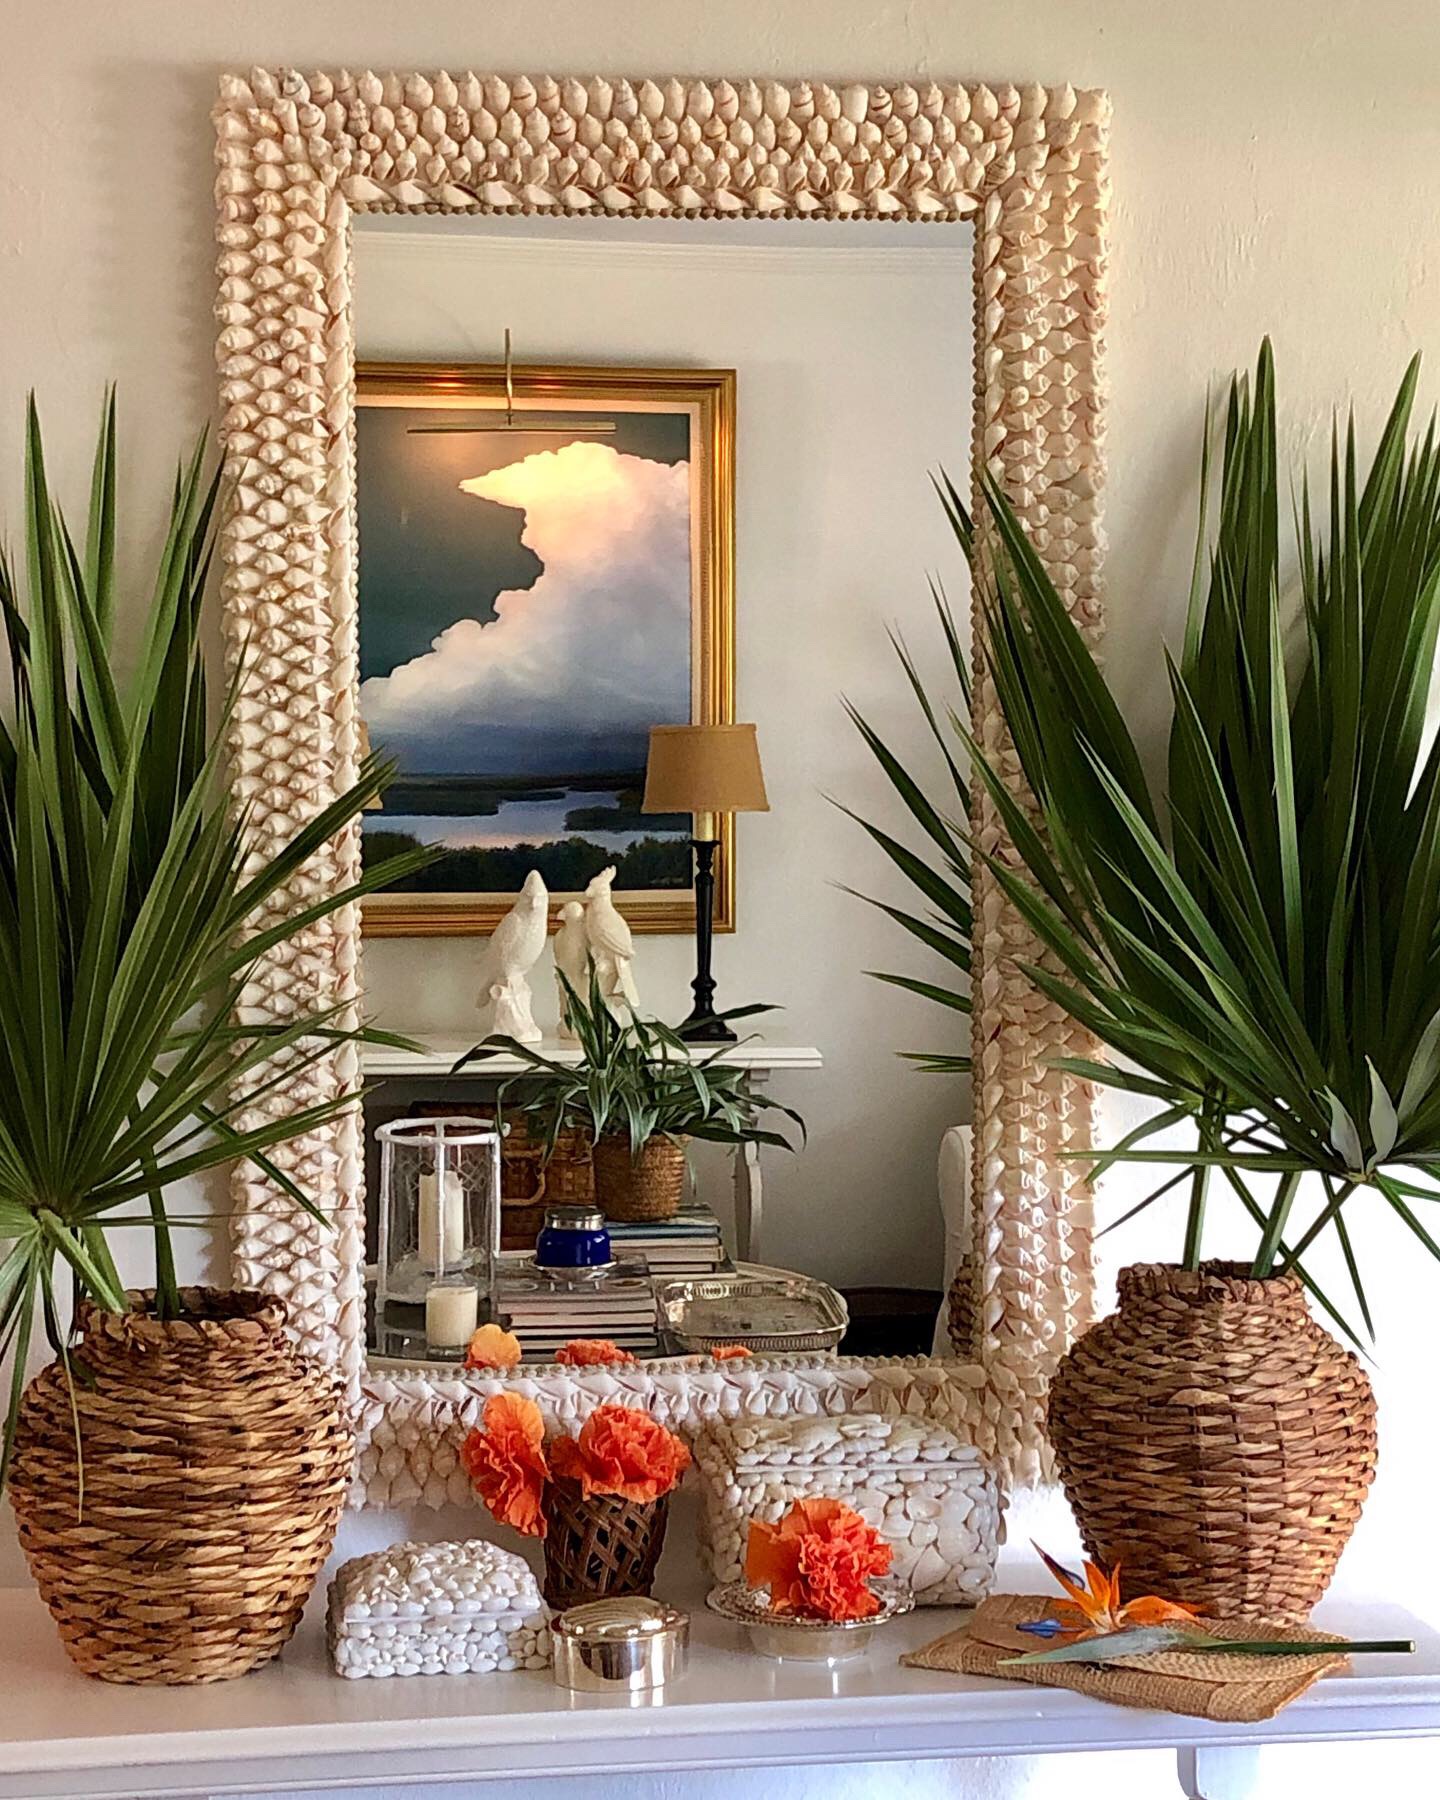 Palm fronds in baskets in front of a large mirror made with white shells. orange hibiscus on the table below it.